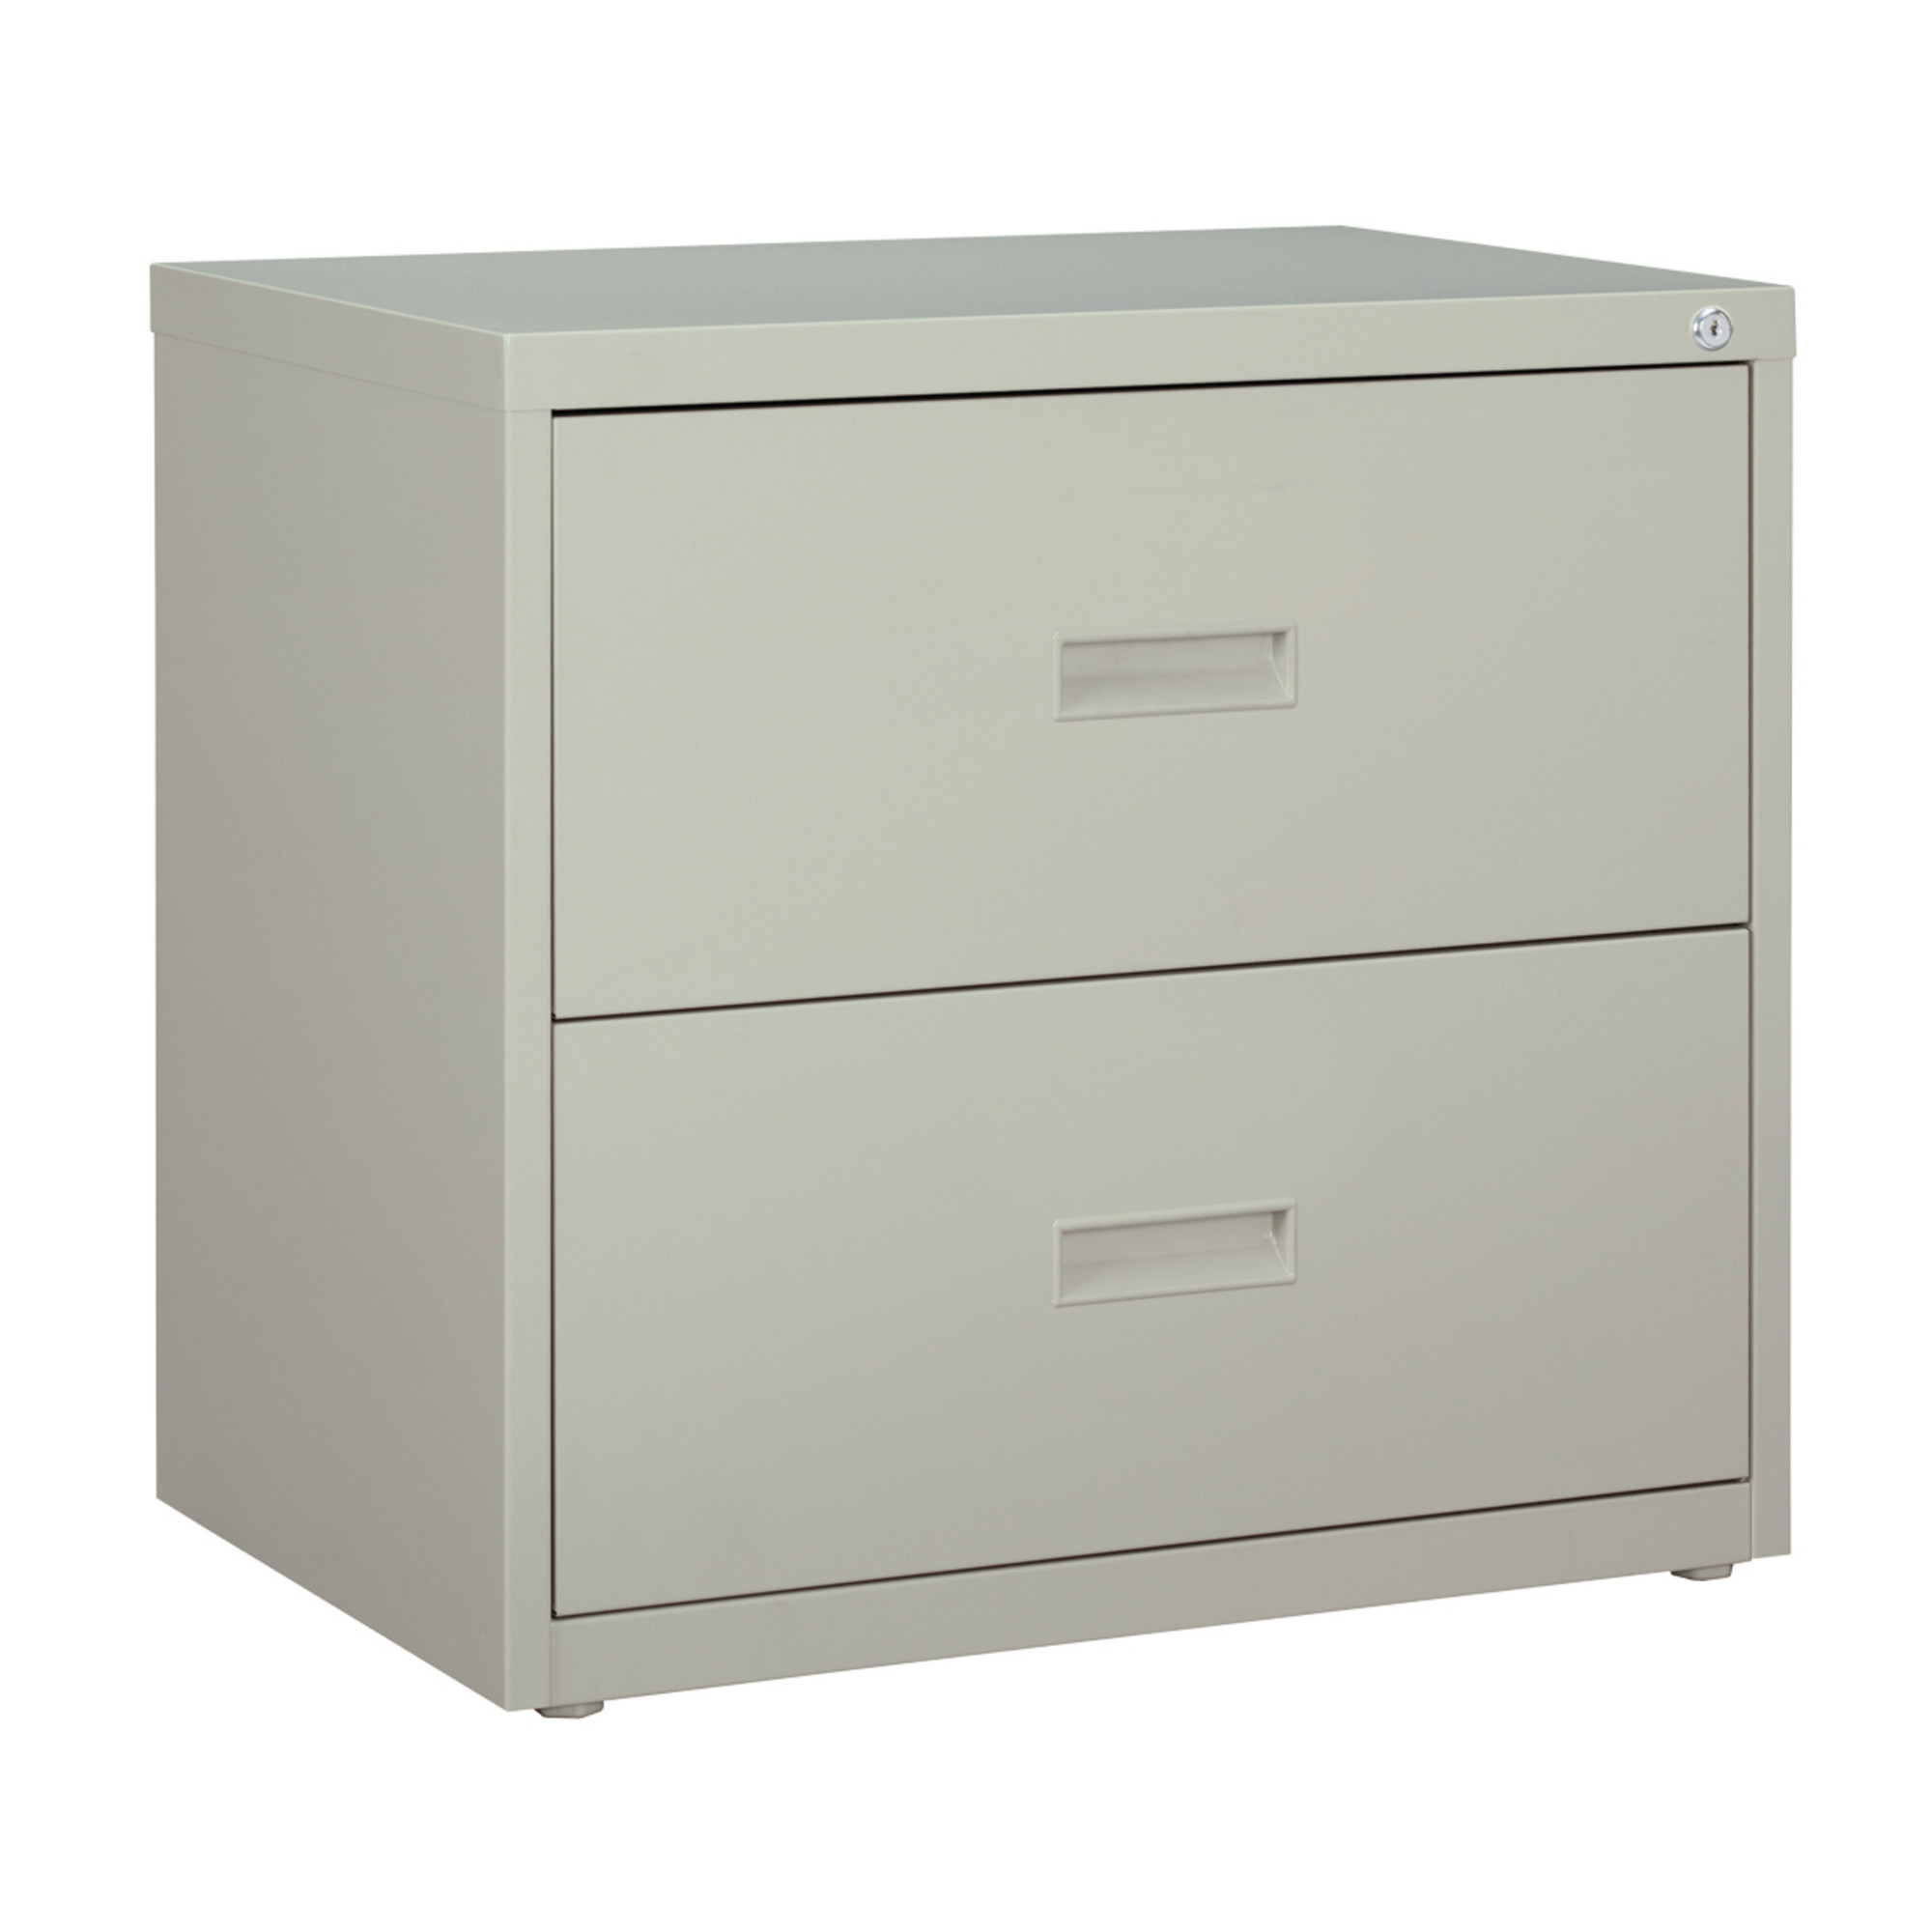 Hirsh Industries, 2 Drawer Lateral File Cabinet, Width 30 in, Depth 18.625 in, Height 28 in, Model 19439